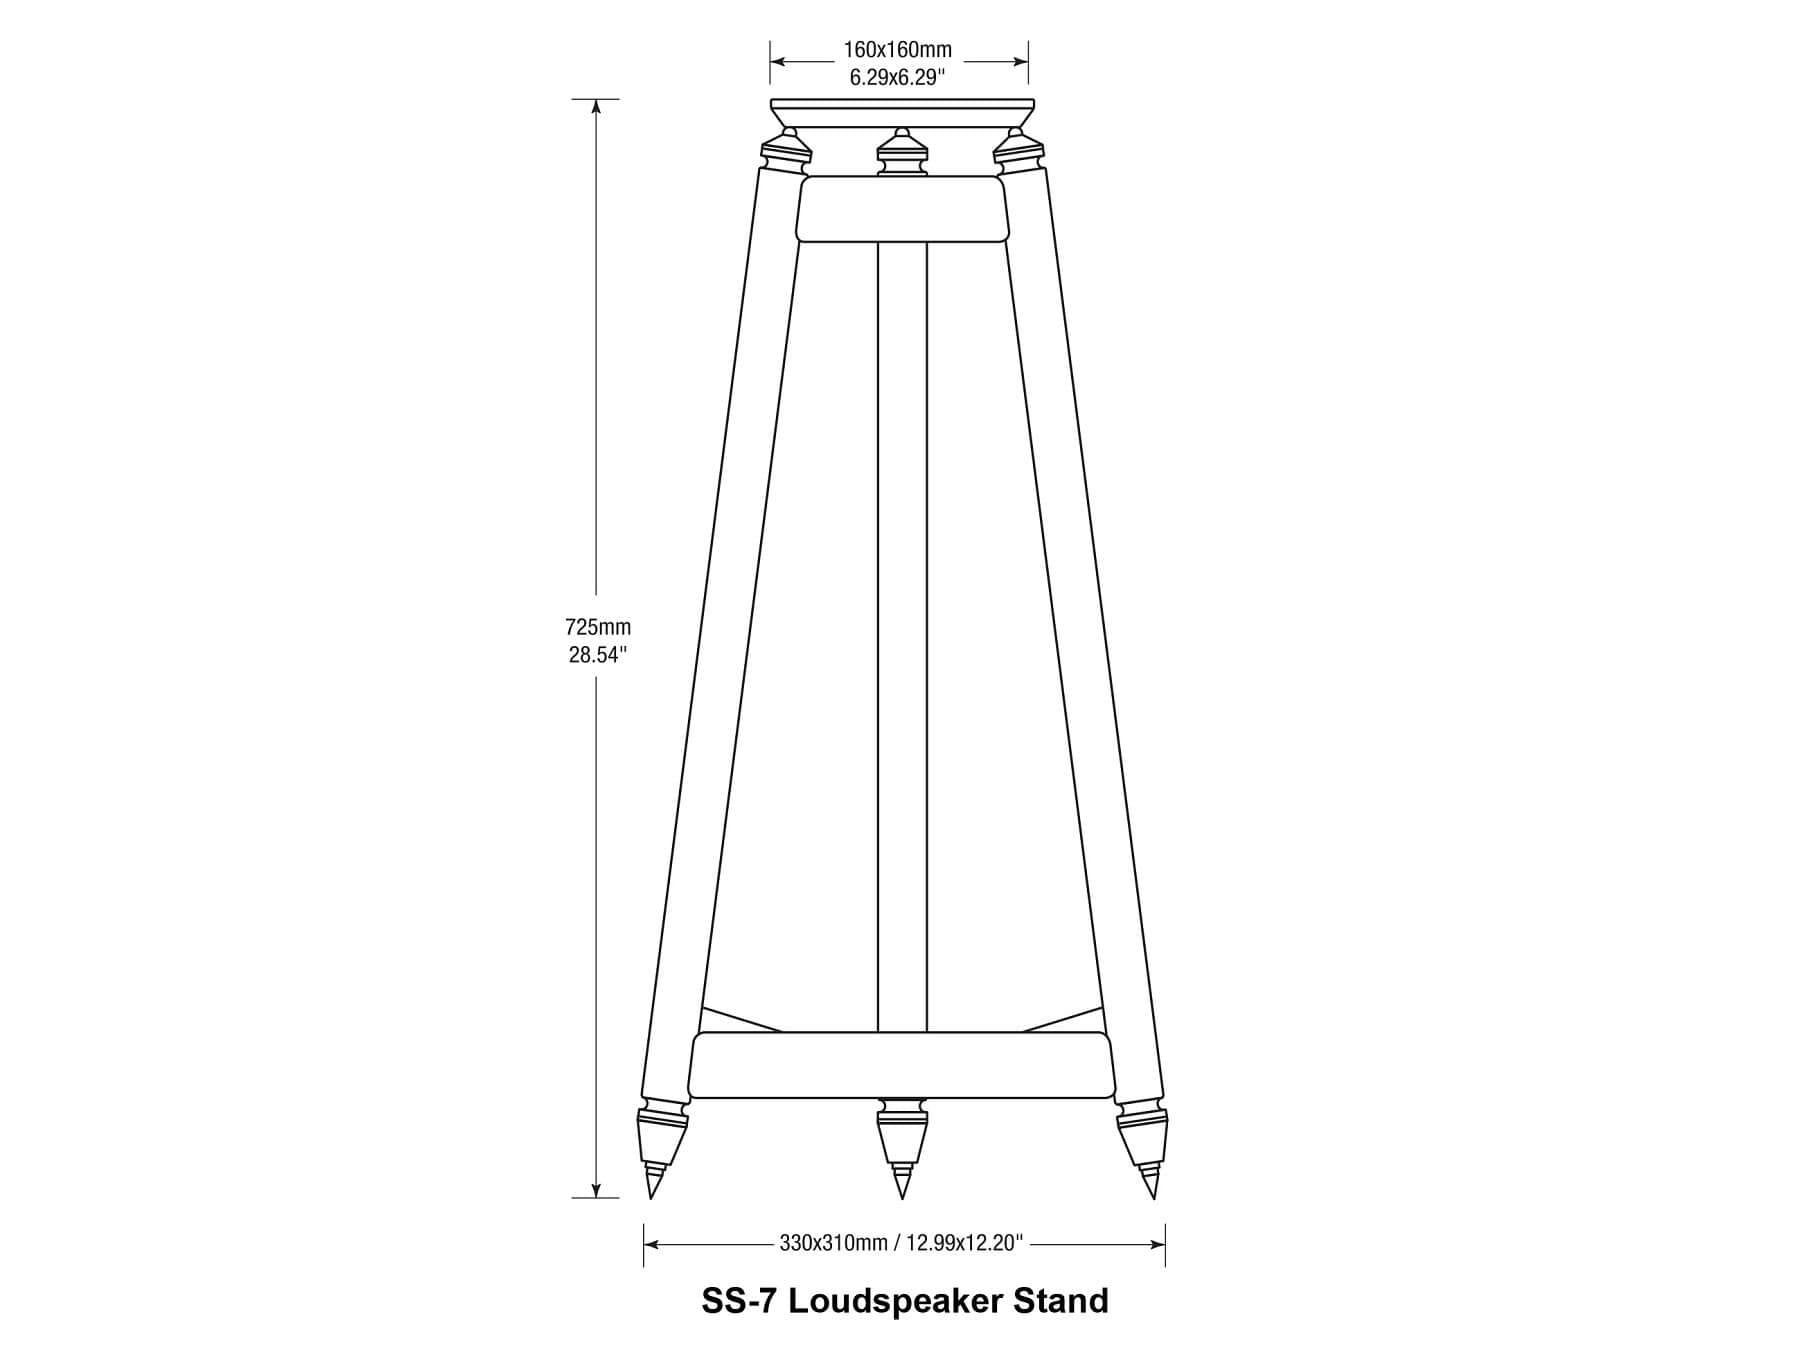 Solidsteel SS-7 - Dimensions